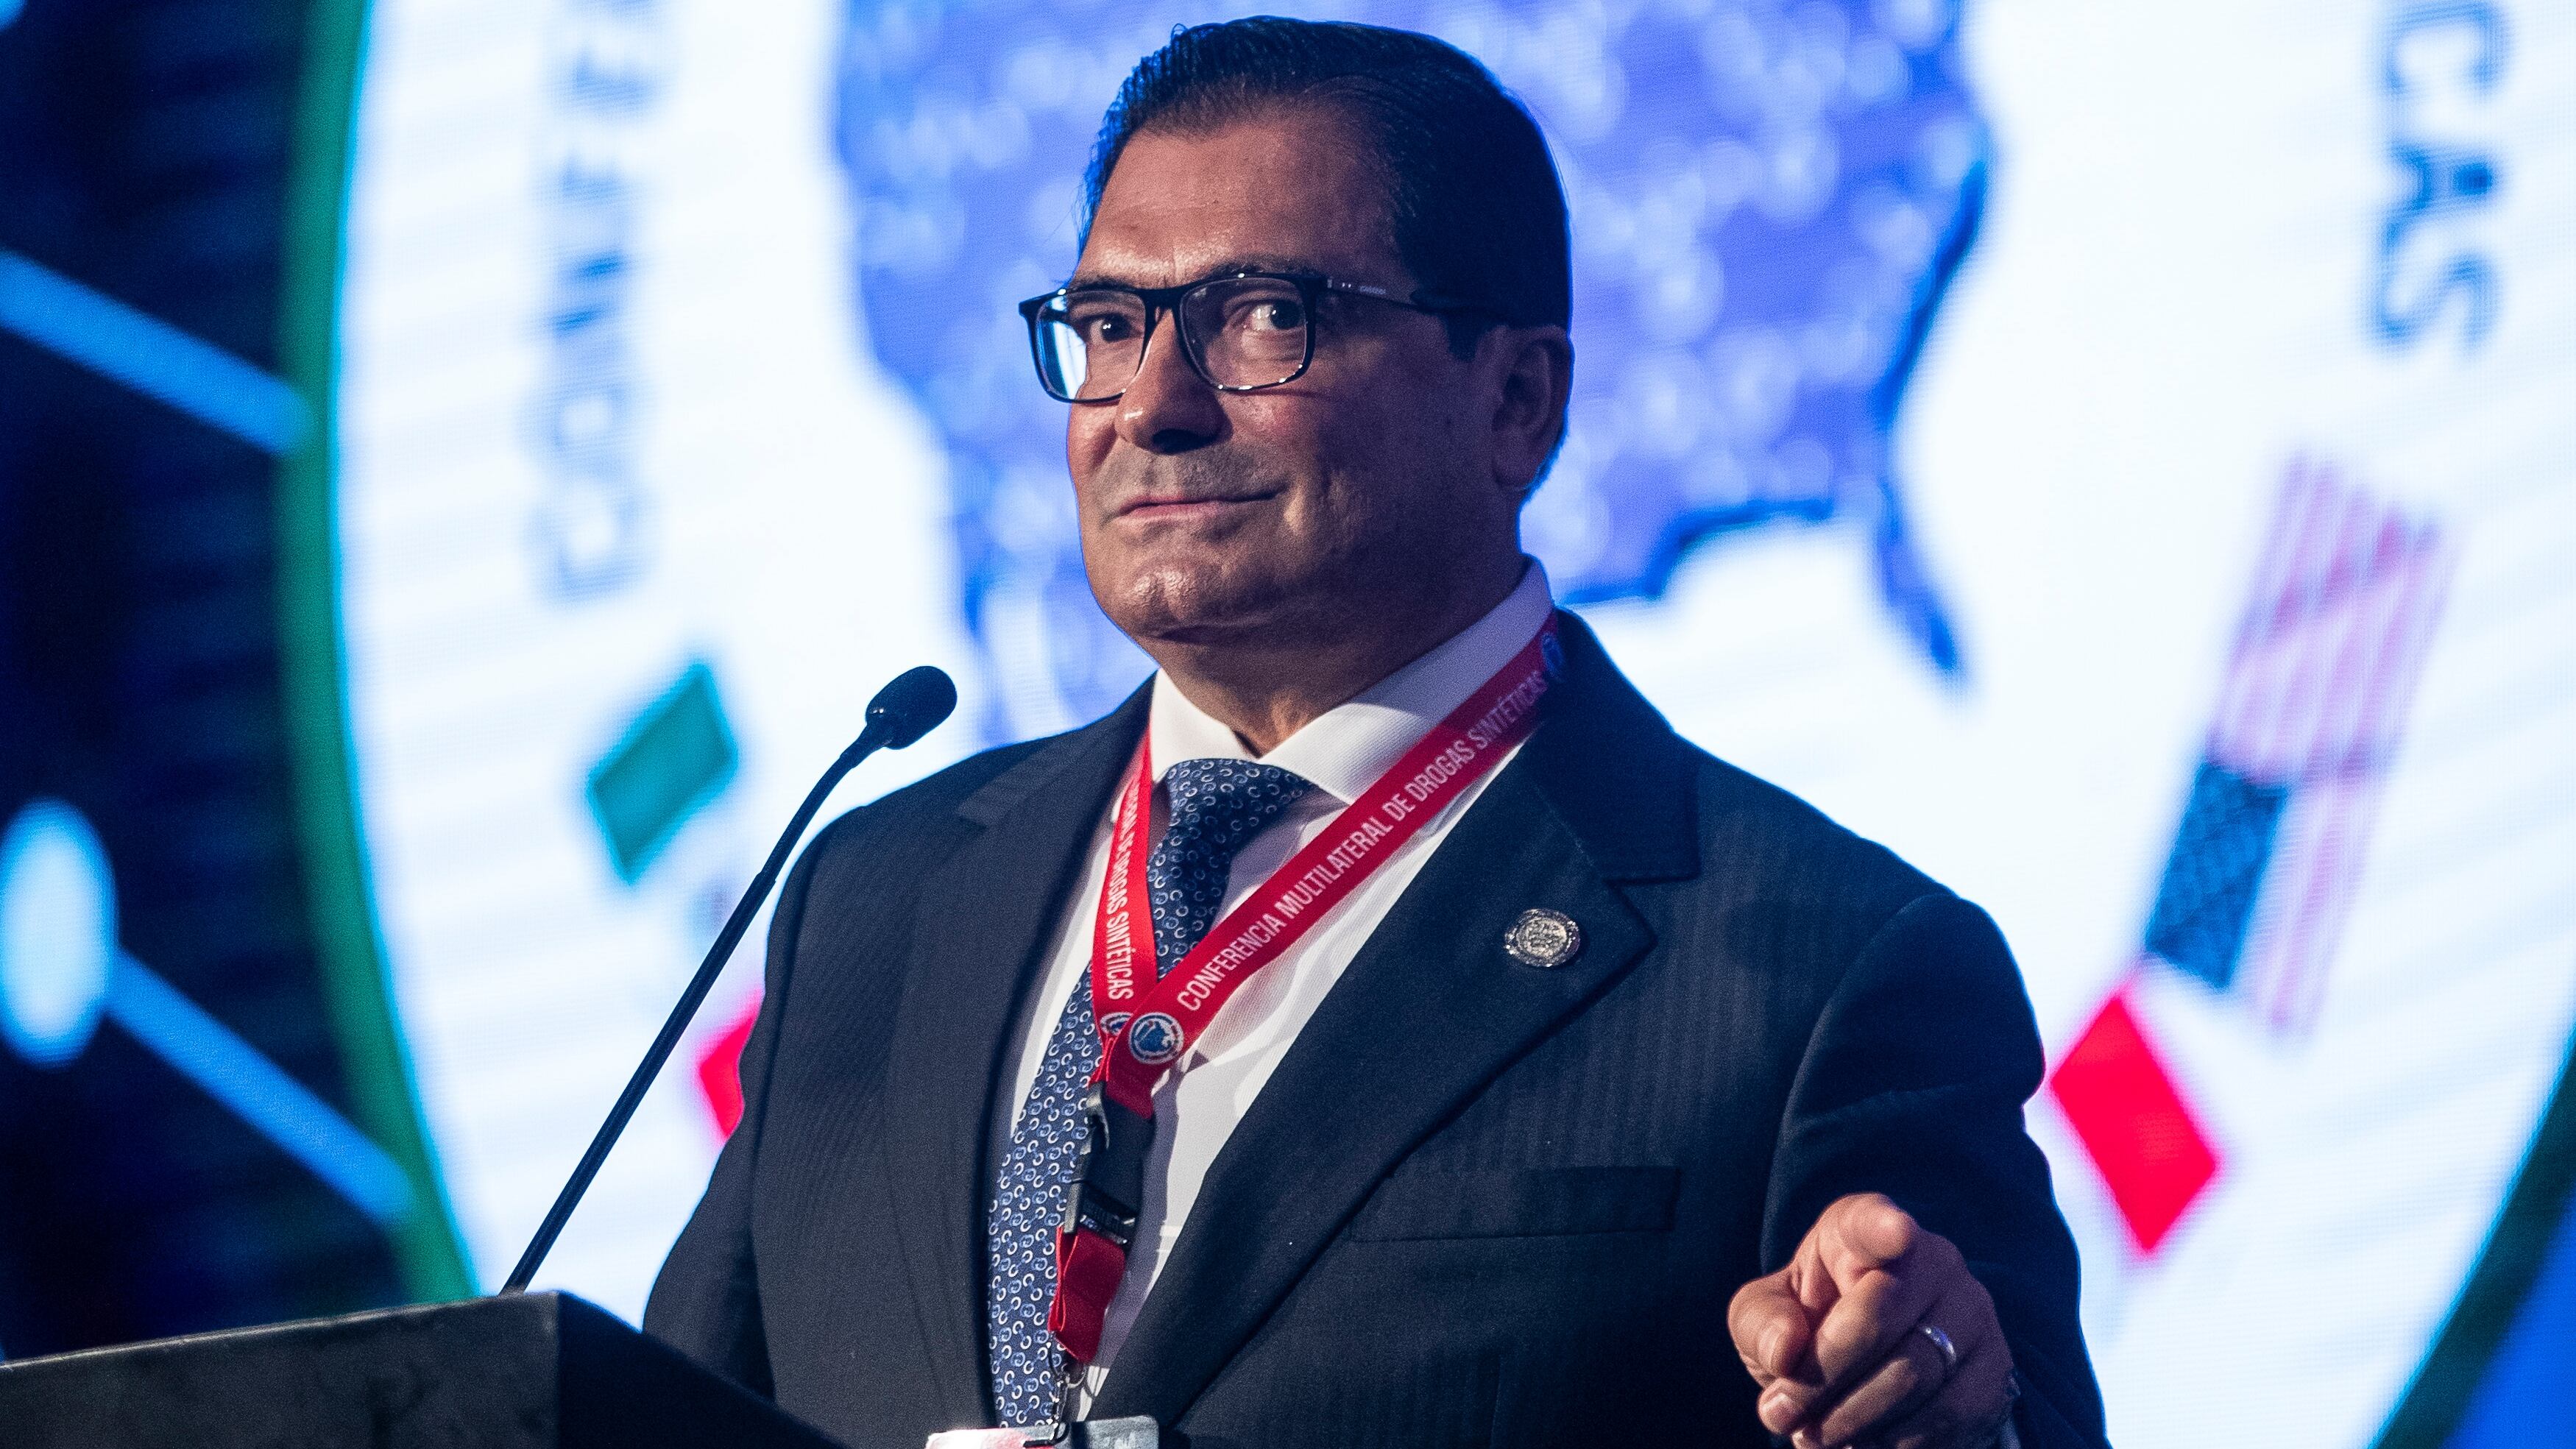 Felipe de Jesús Gallo at the International Conference on Synthetic Drugs, on April 23.